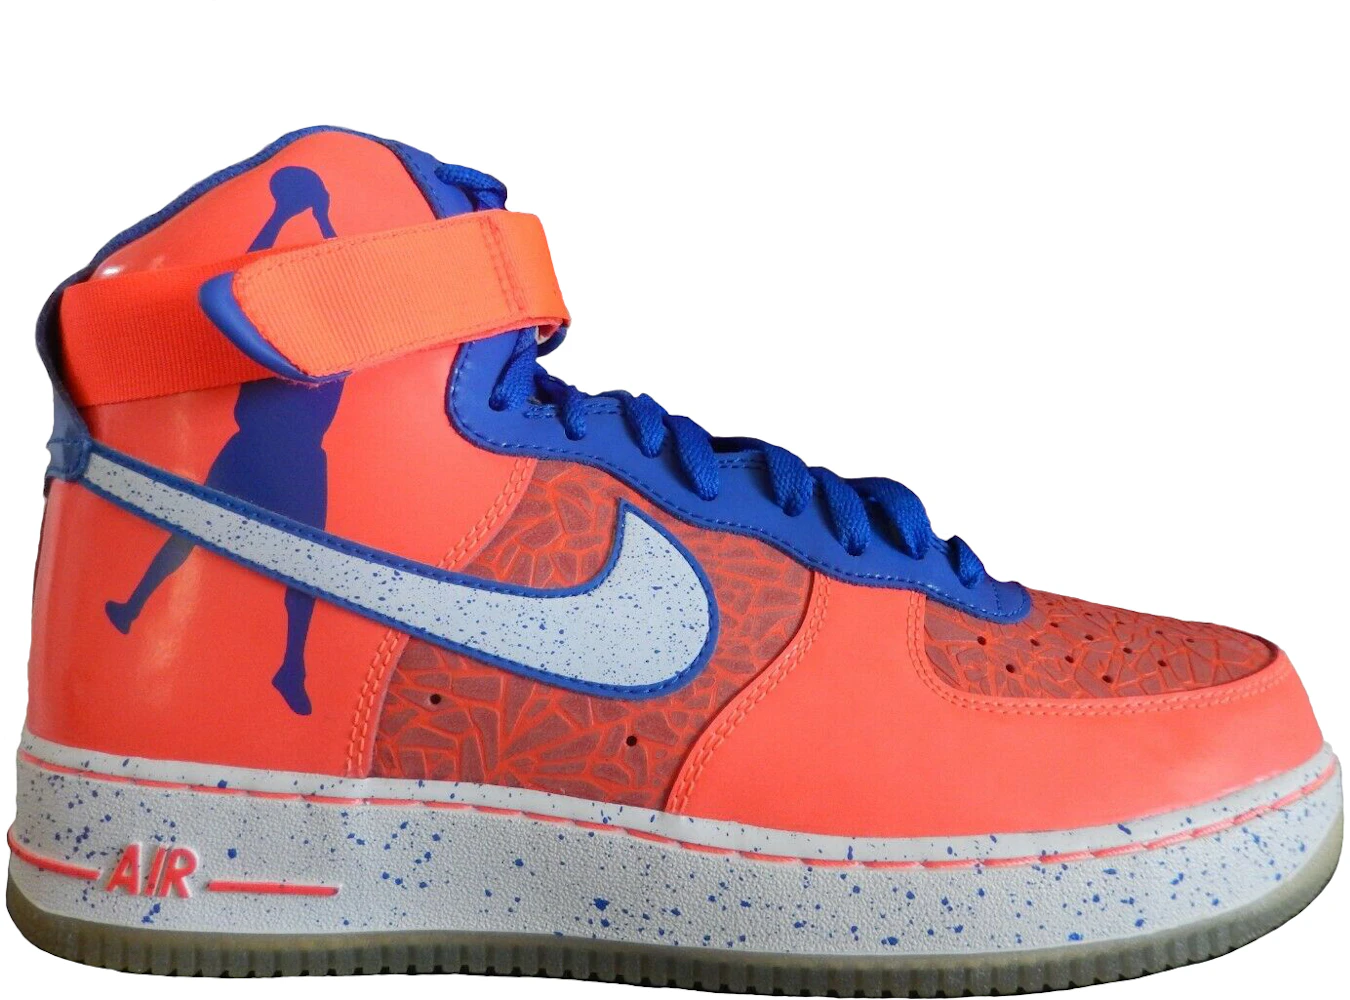 Rasheed Wallace explains why he played in Air Force 1's